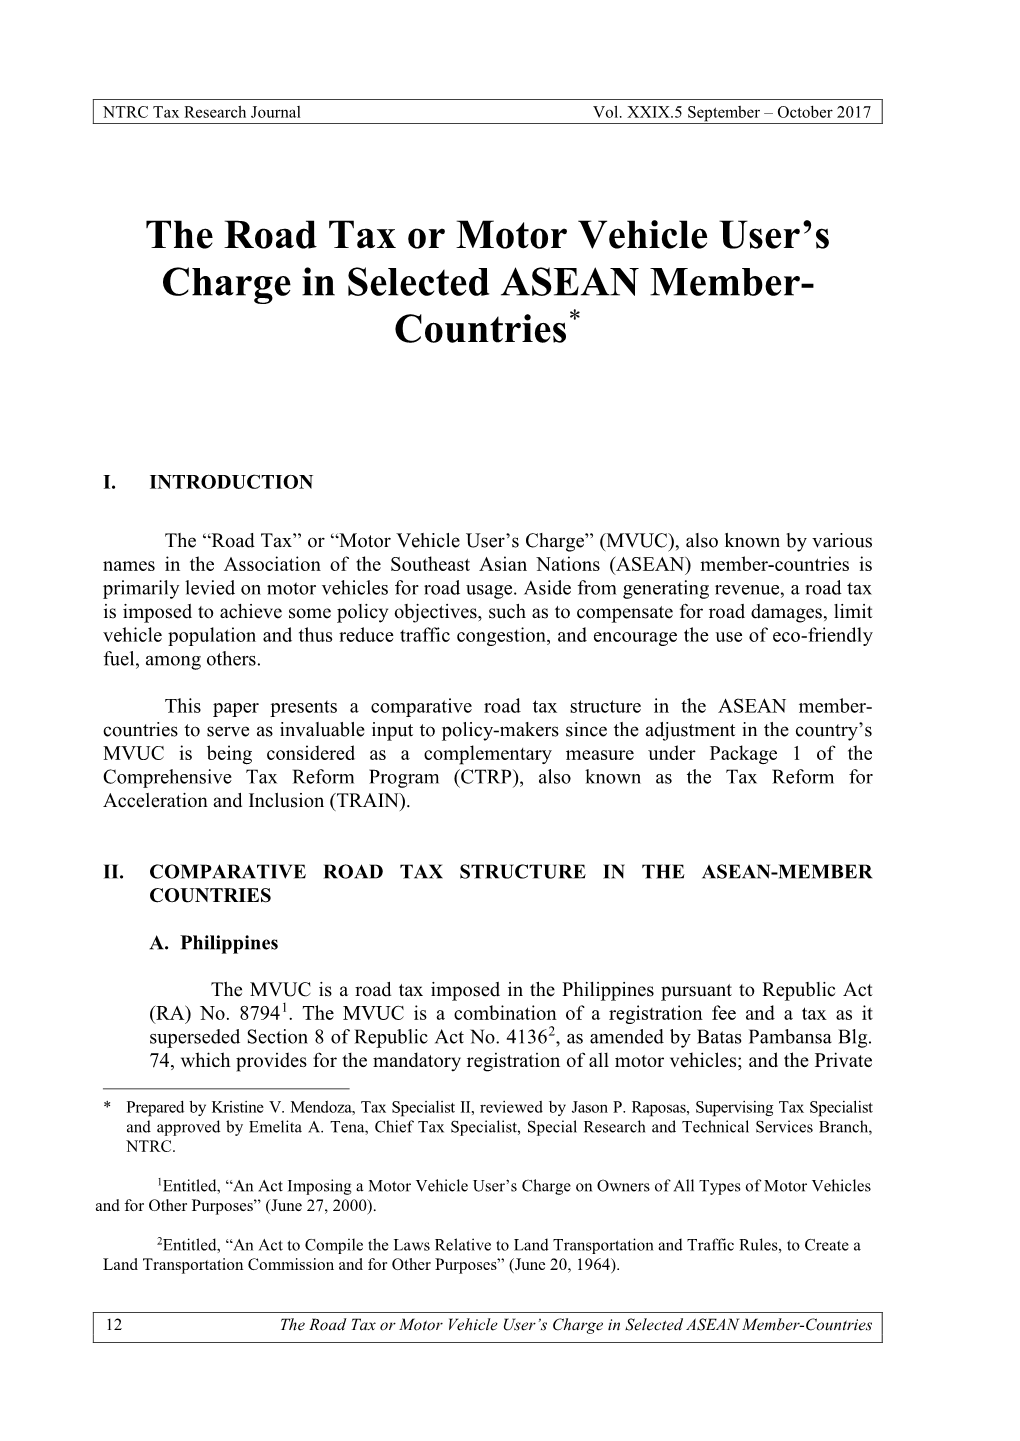 The Road Tax Or Motor Vehicle User's Charge in Selected ASEAN Member- Countries